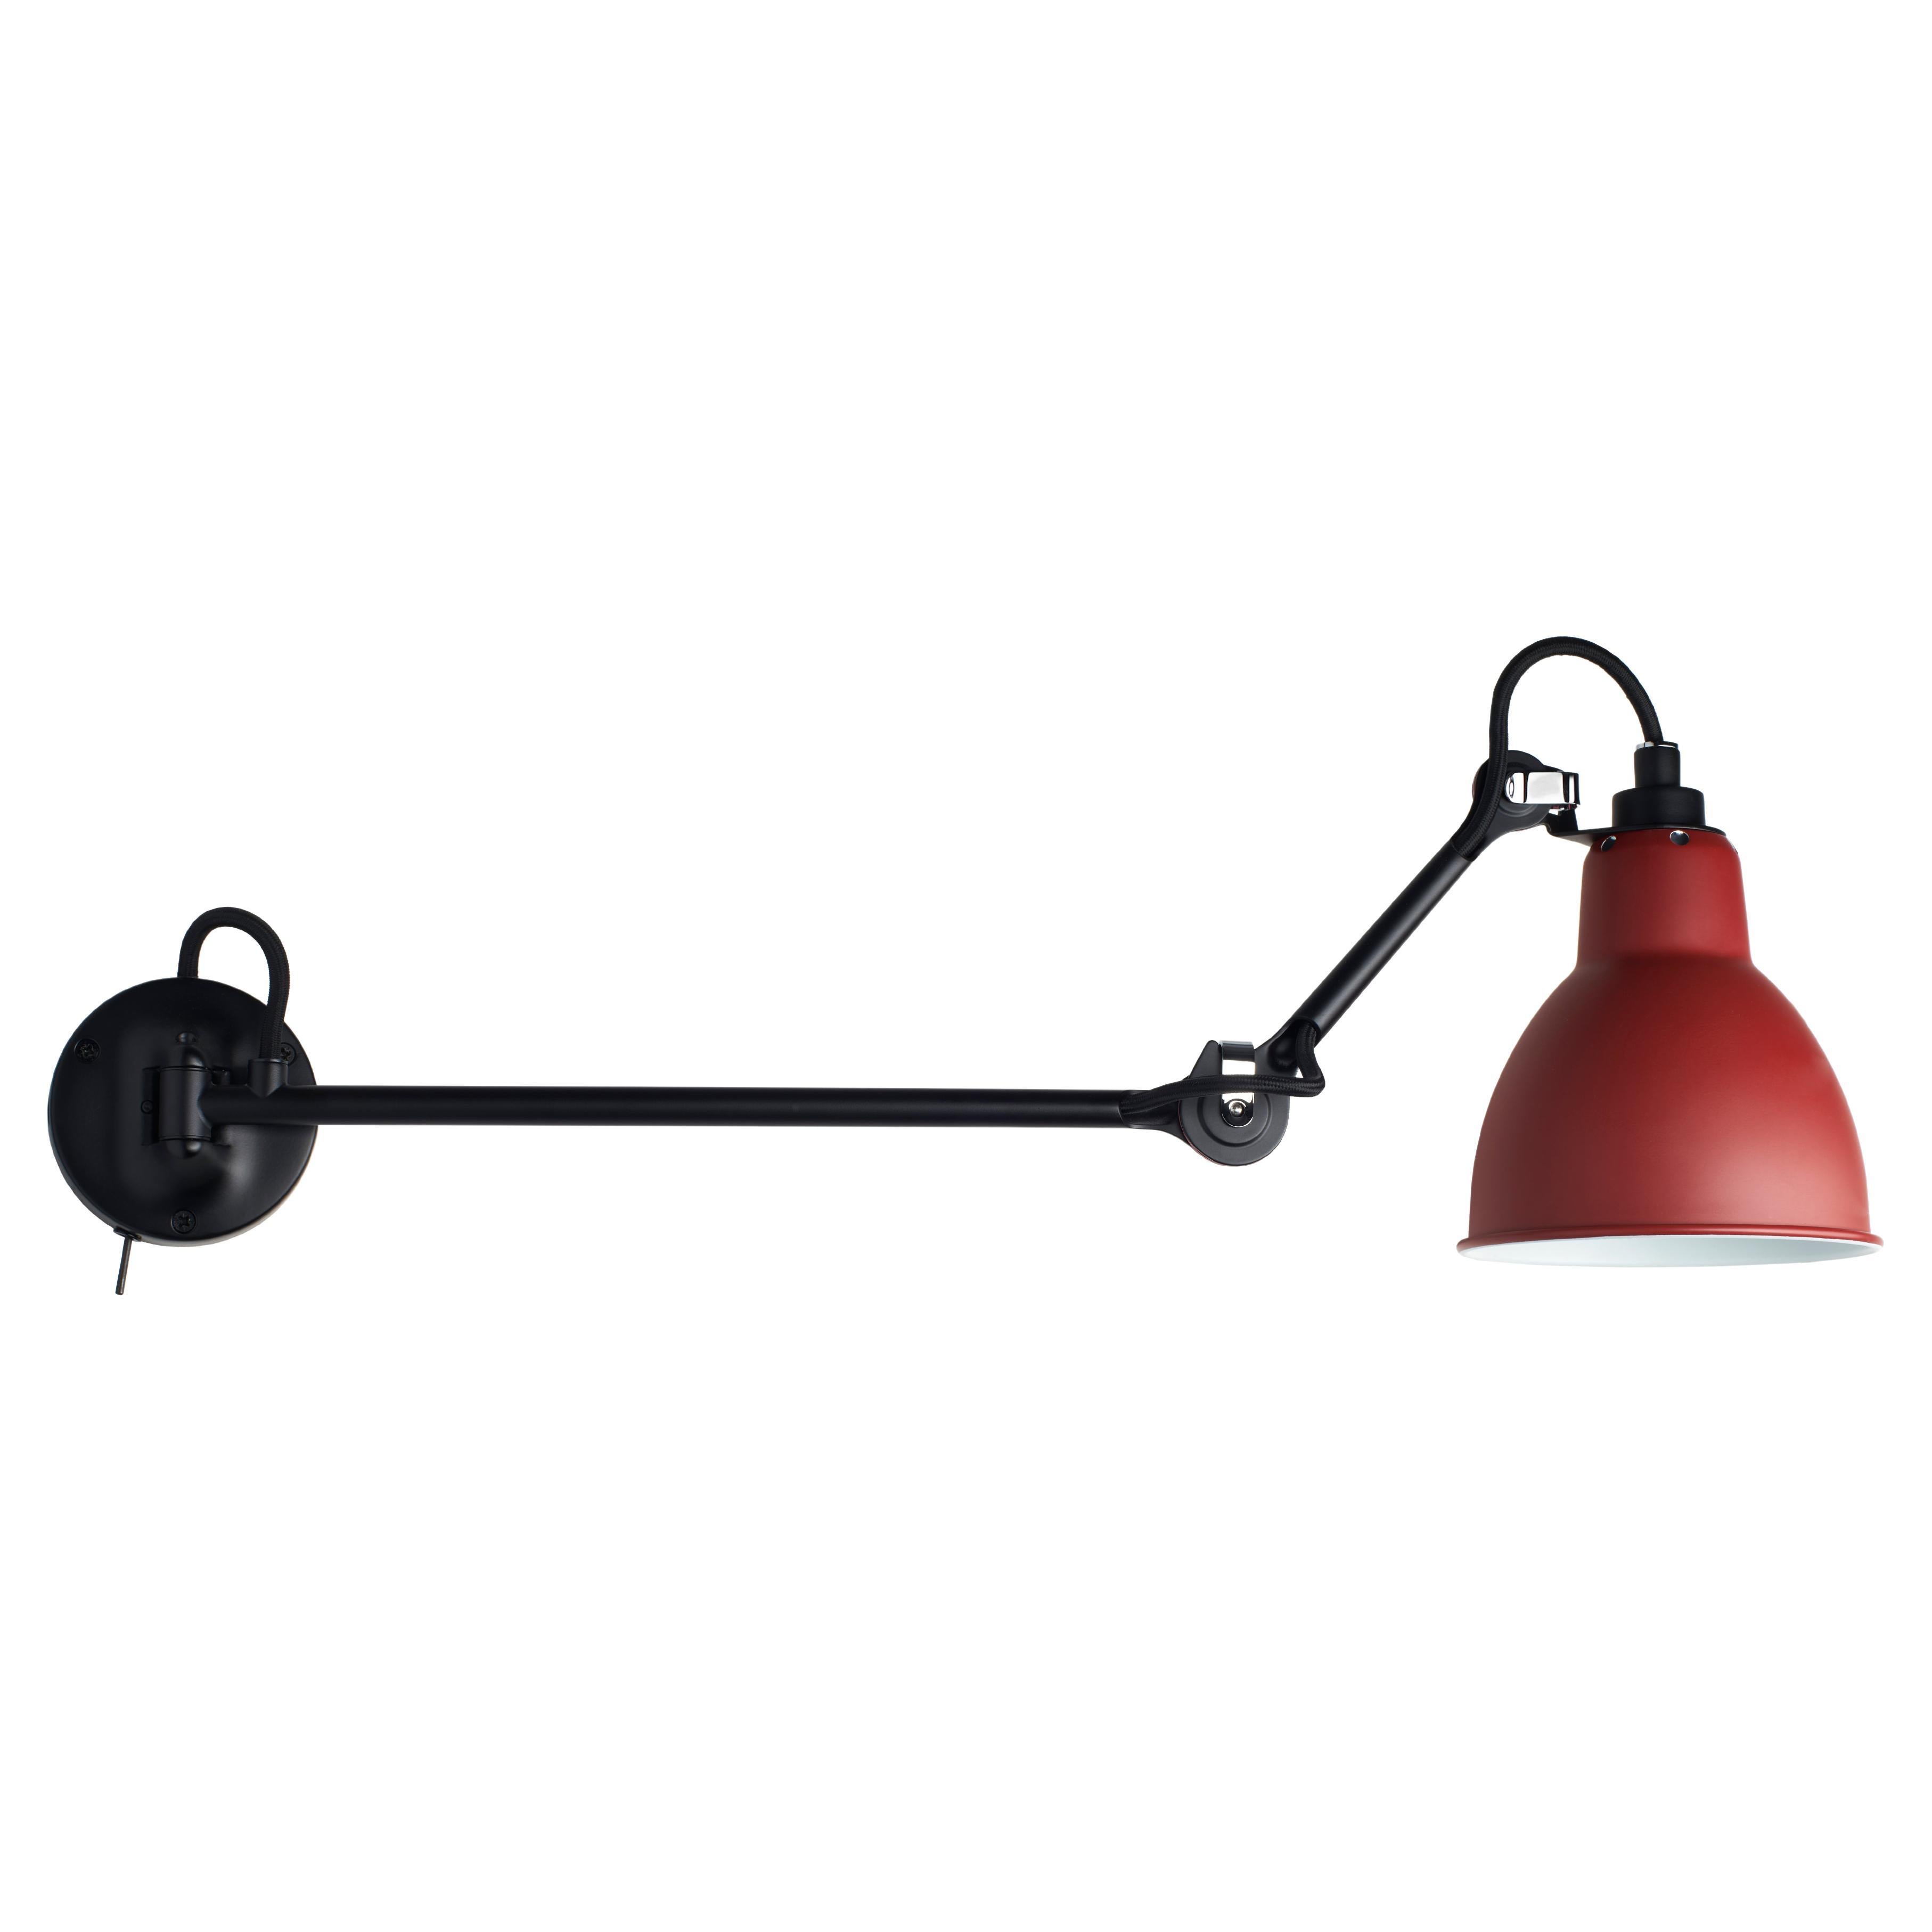 DCW Editions La Lampe Gras N°204 L40 SW Wall Lamp in Black Steel Arm & Red Shade